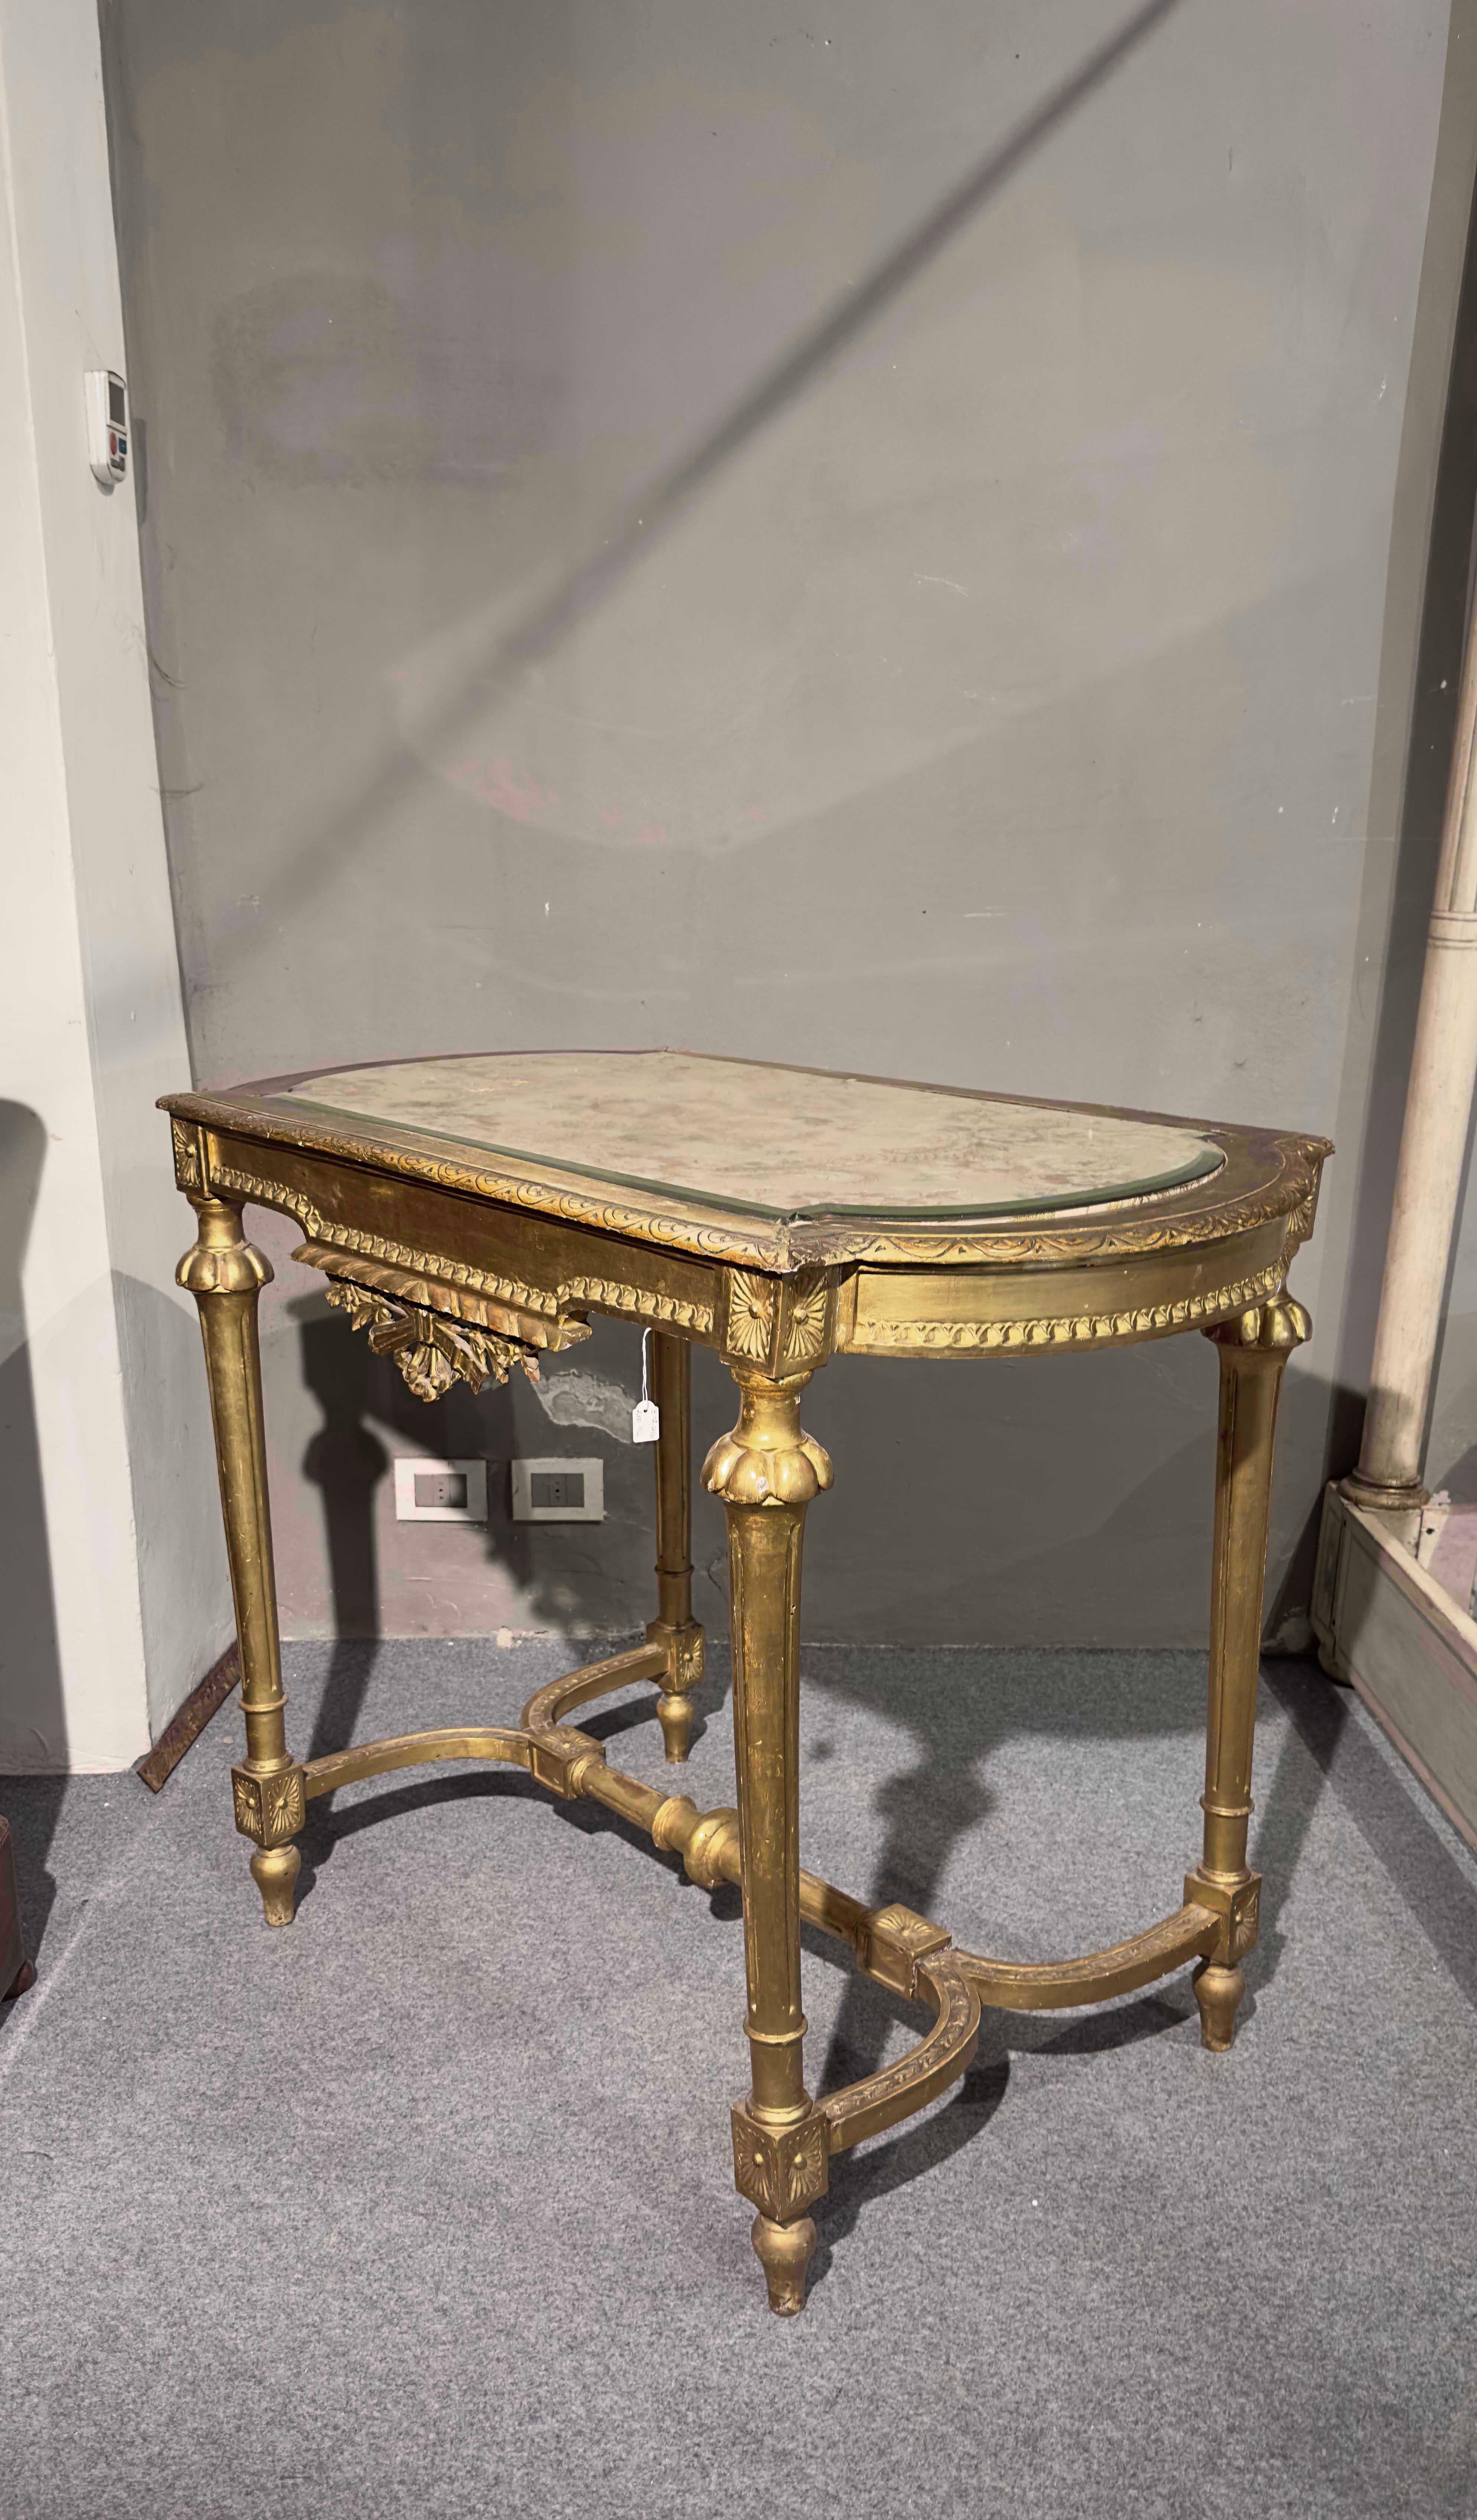 Neoclassical Revival END OF THE 19th CENTURY GOLDEN TABLE IN NEOCLASSIC STYLE  For Sale